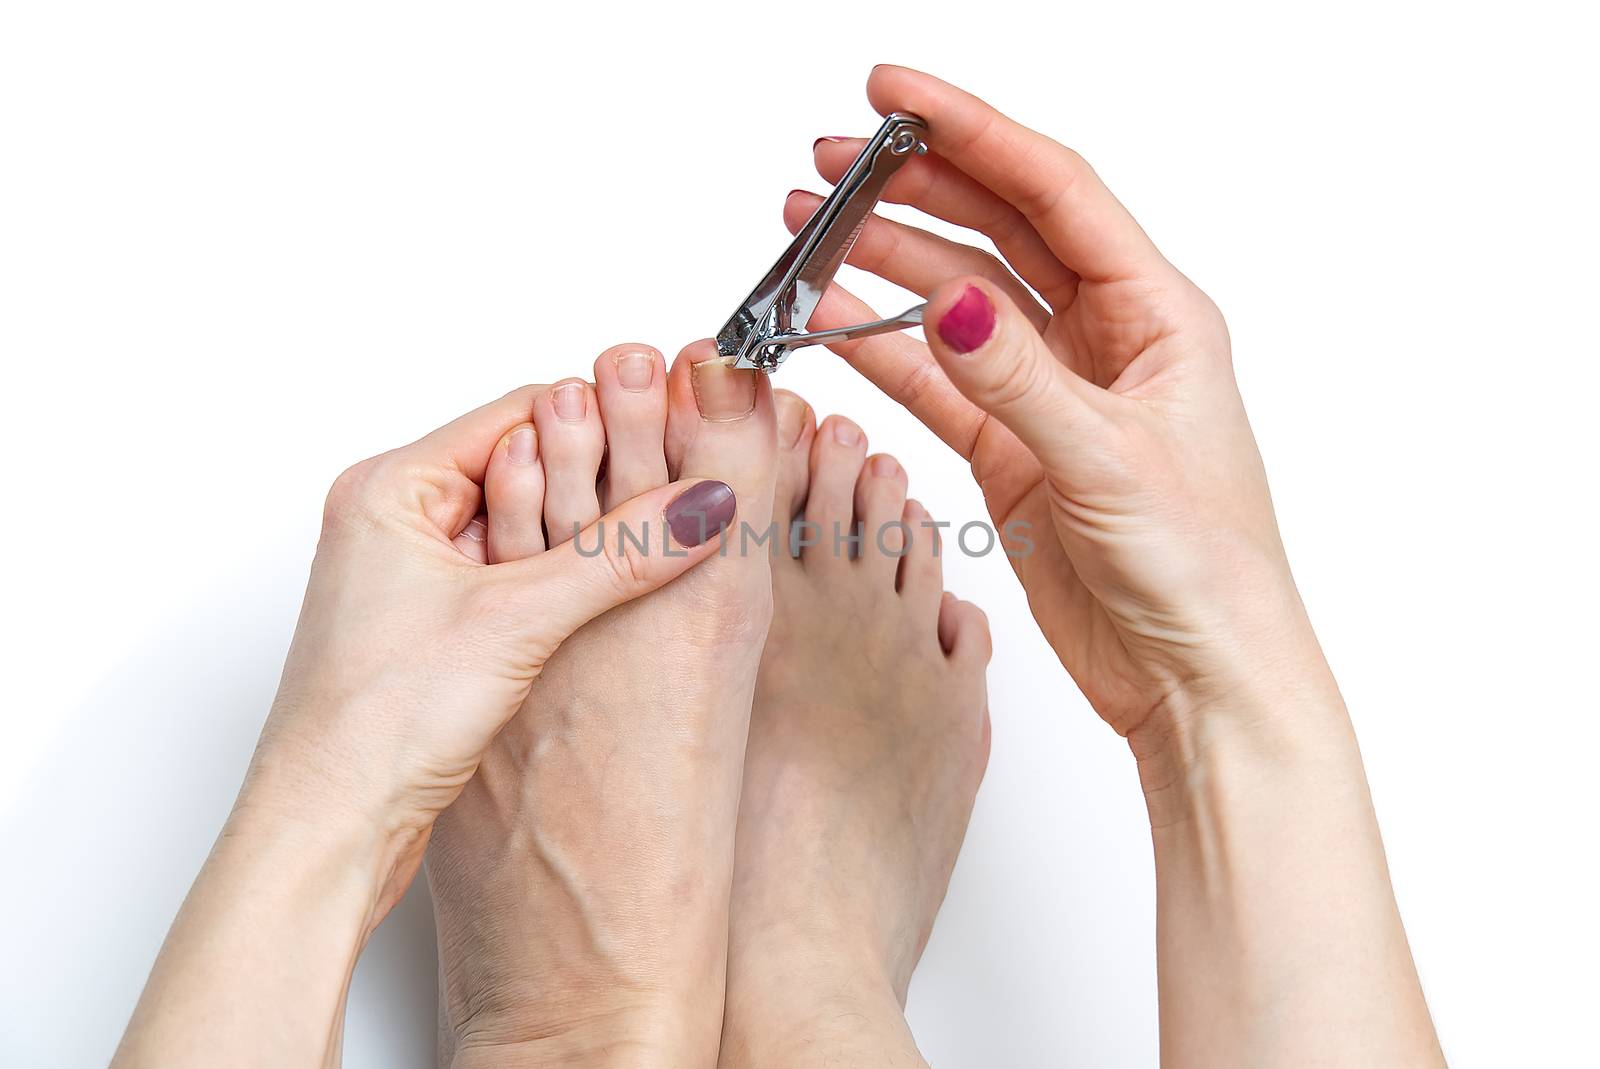 Woman at home spa doing pedicure to herself in white background, close-up